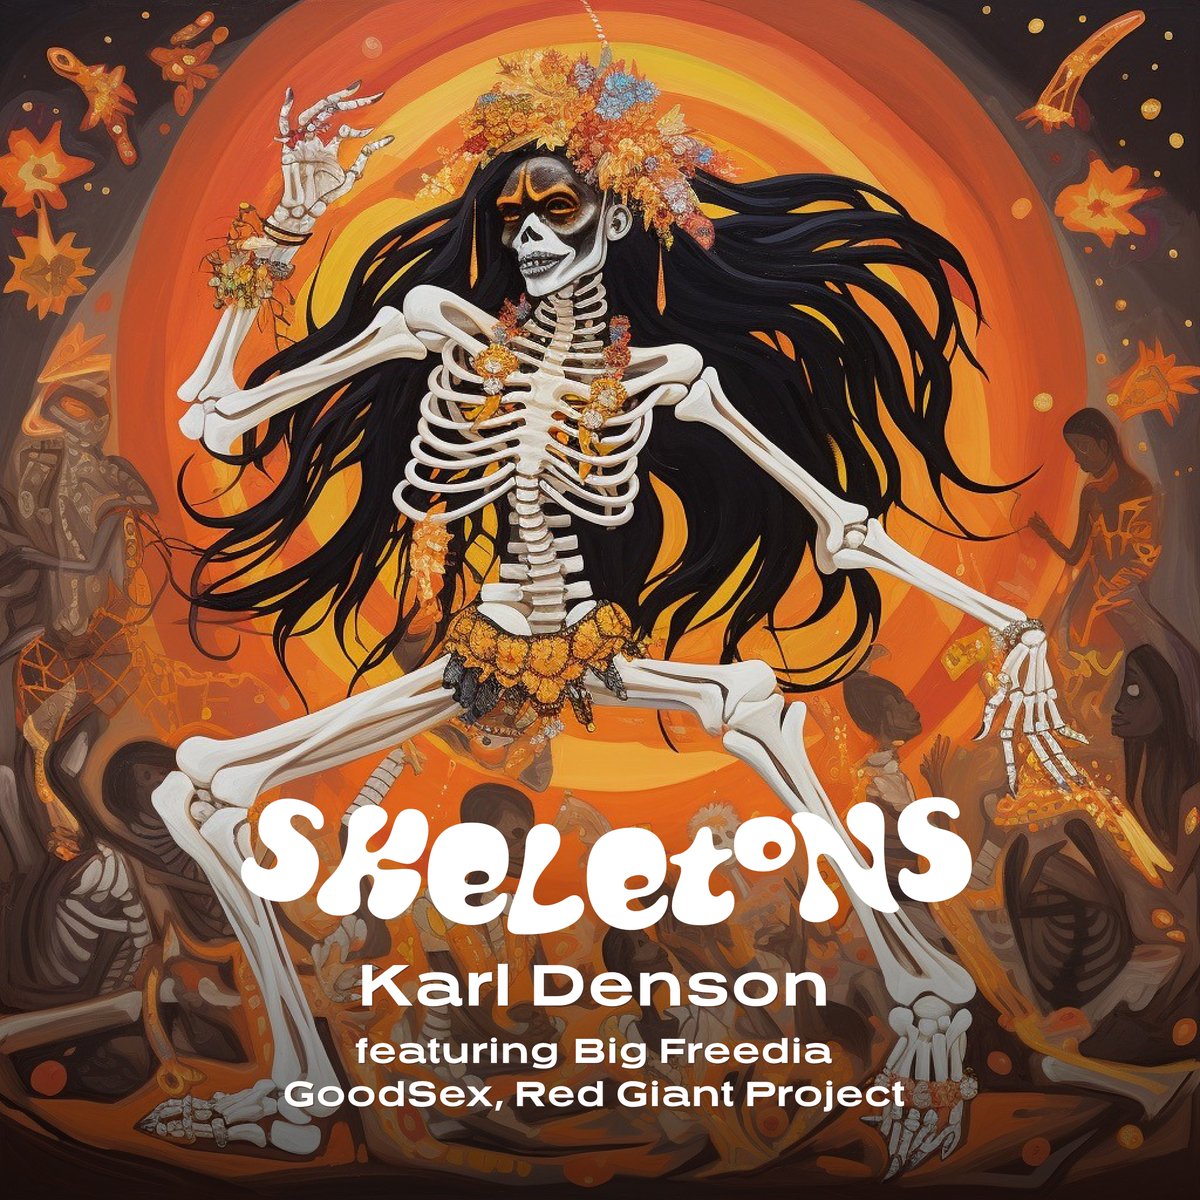 NEW TRACK ALERT! KARL DENSON PRESENTS SKELETONS featuring @bigfreedia @redgiantproject #GoodSex! OUT TONIGHT AT MIDNIGHT ON ALL YOUR FAVORITE STREAMING SERVICES! Presave track here - orcd.co/skeletonskd